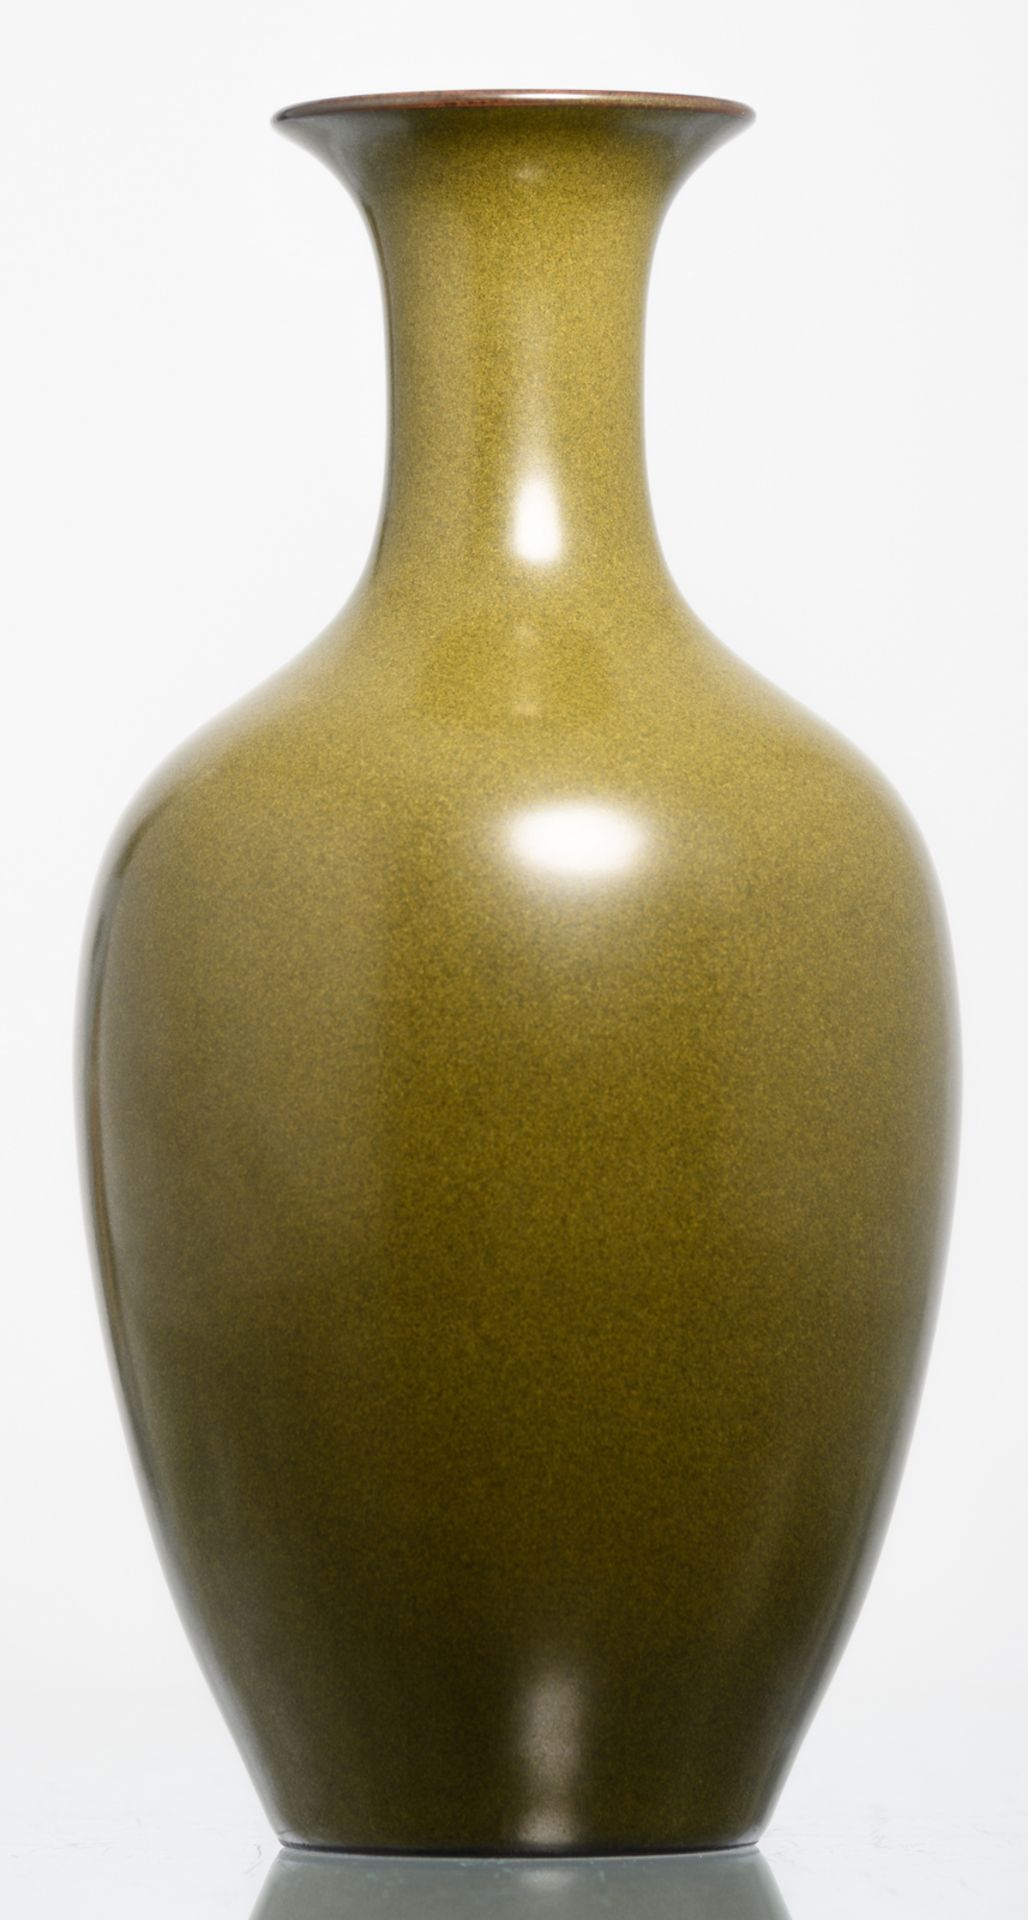 A fine Chinese tea dust glazed vase, Qianlong marked, a similar vase was sold at Poly Auction - Image 3 of 6